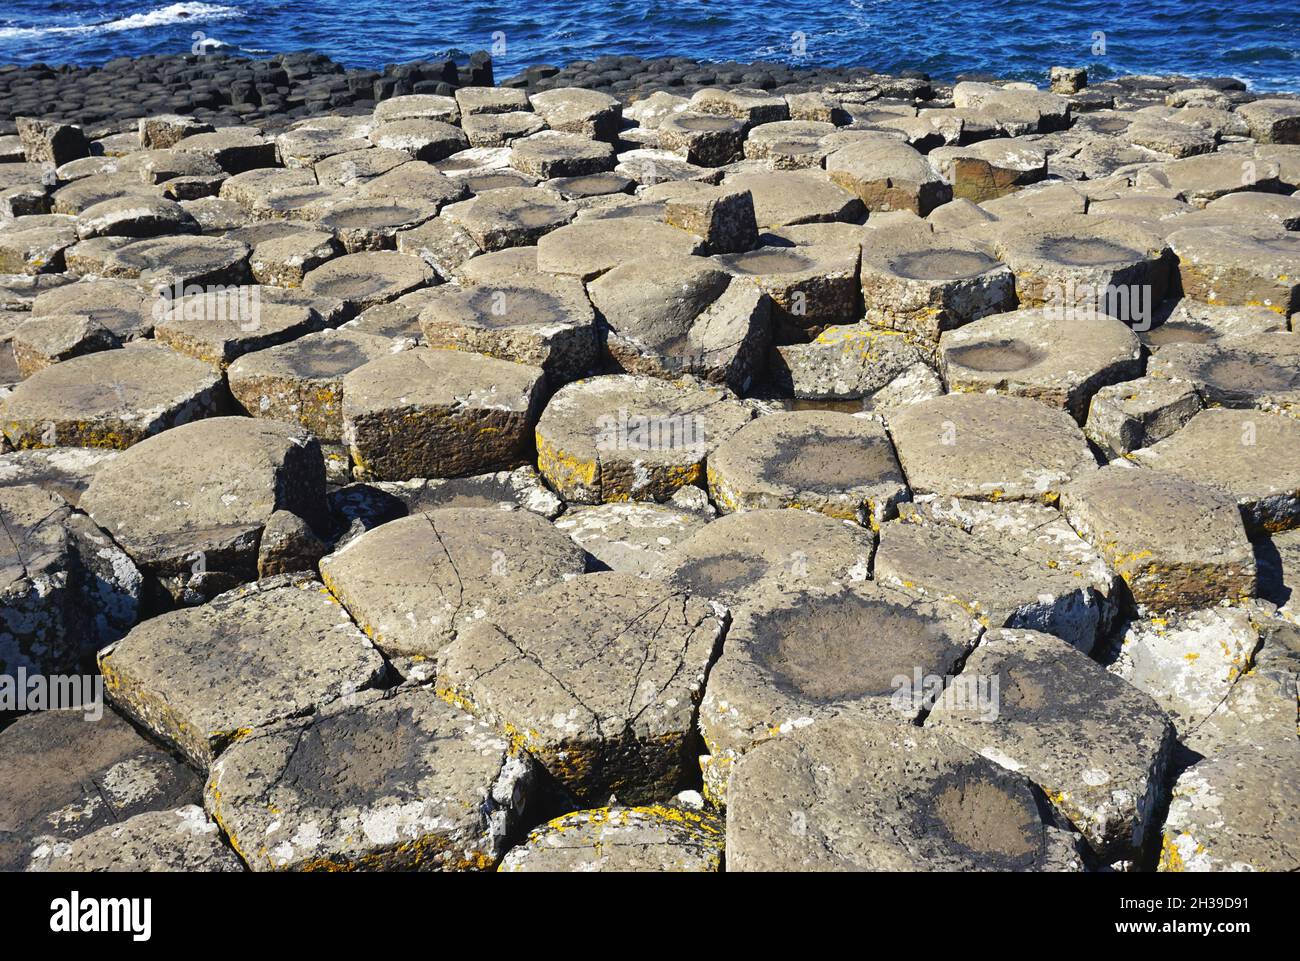 Weathered uneven surface of ancient volcanic rock formations at the Giant's Causeway, located in Country Antrim, on the coast of Northern Ireland Stock Photo